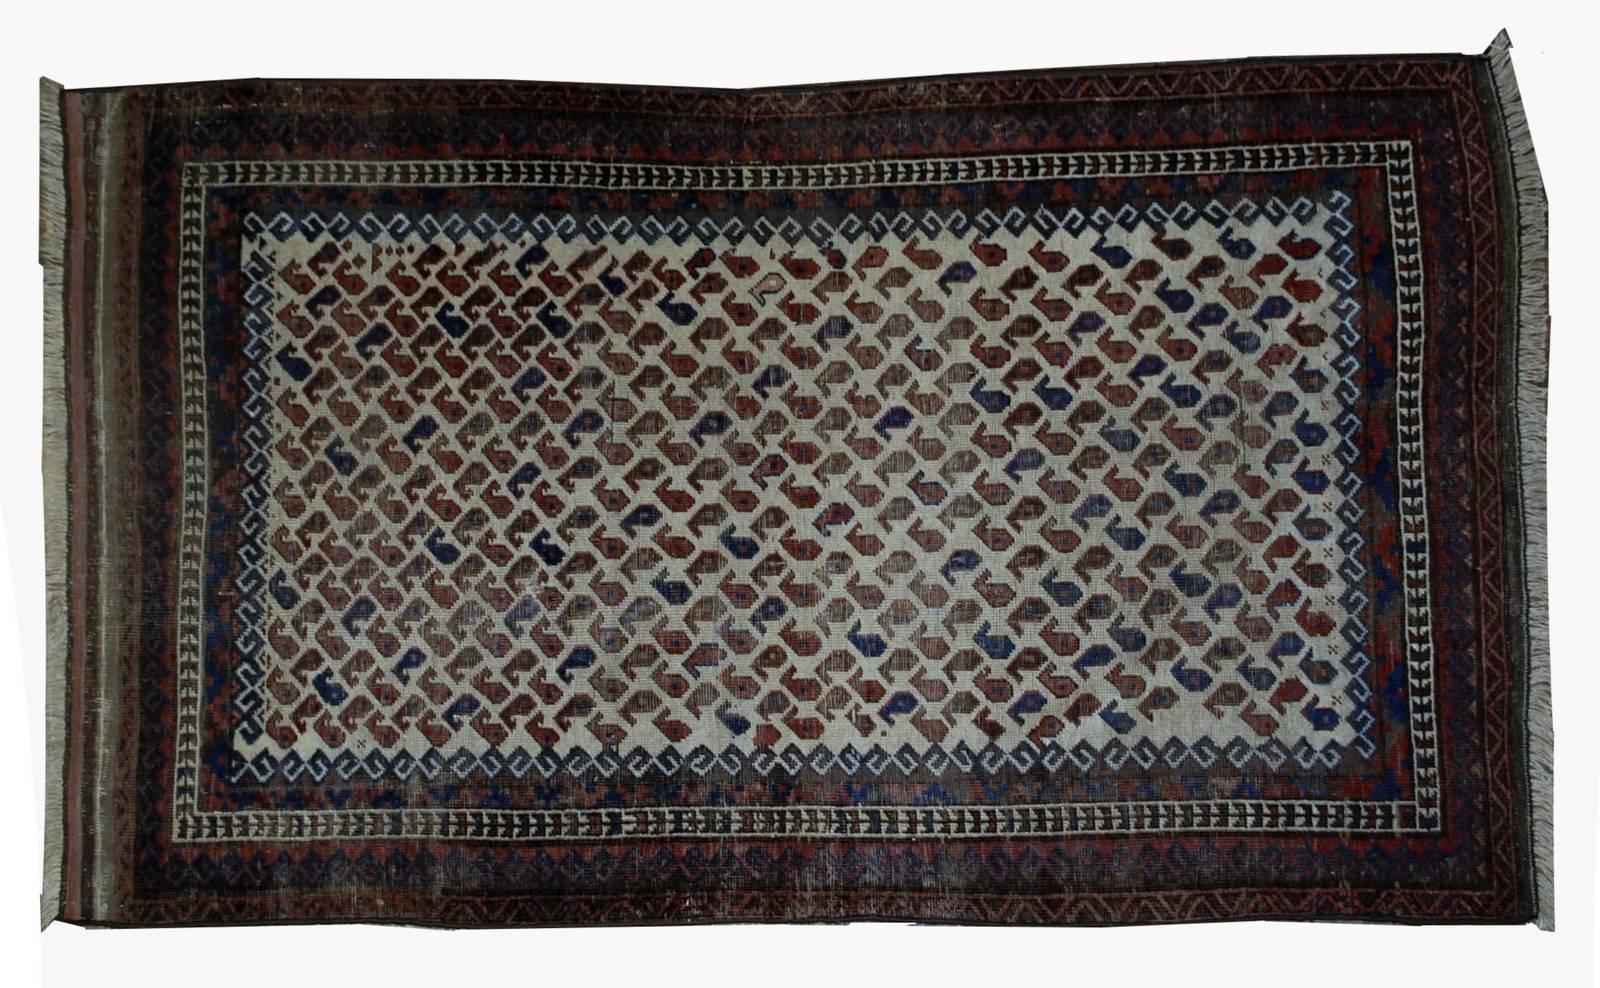 Antique handmade Afghan Baluch rug in original condition. The rug is from the end of 19th century. It has all-over 